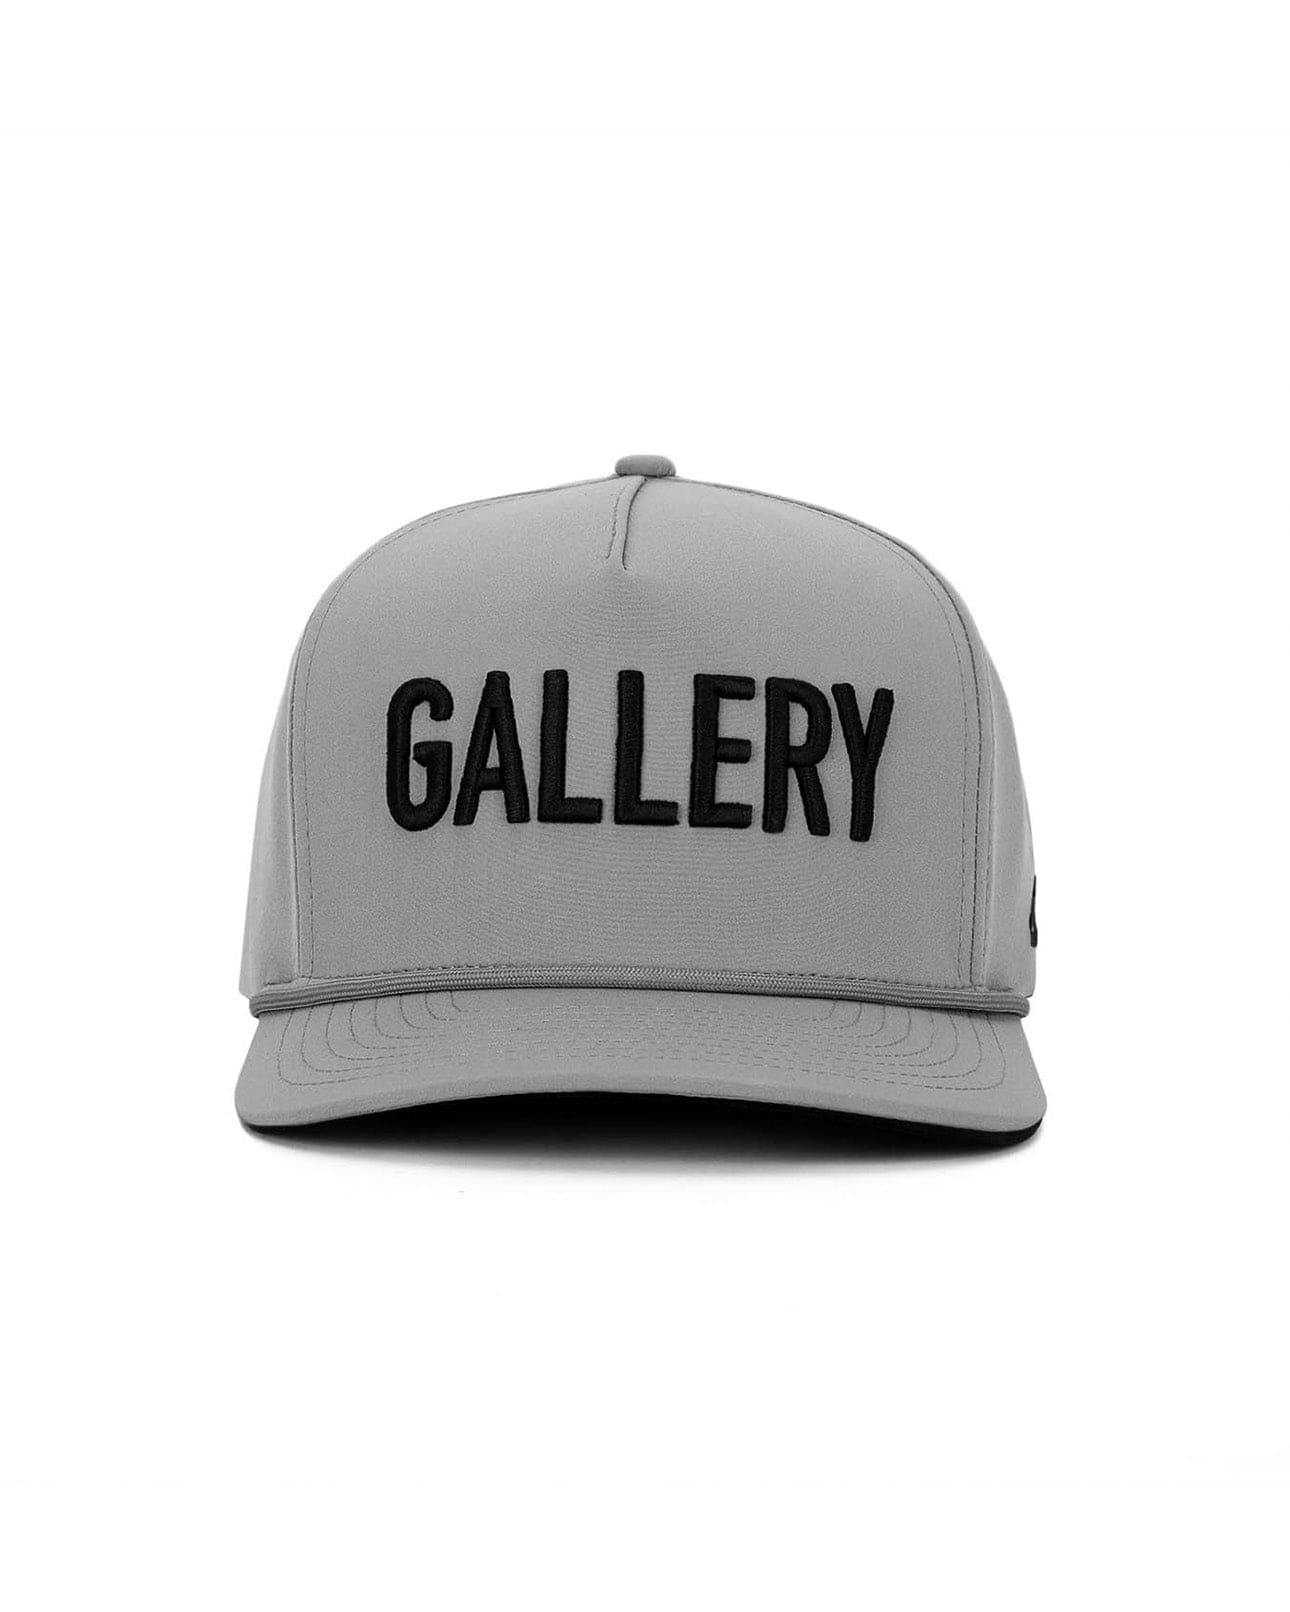 GALLERY PLAYERS HAT - WOLF GREY